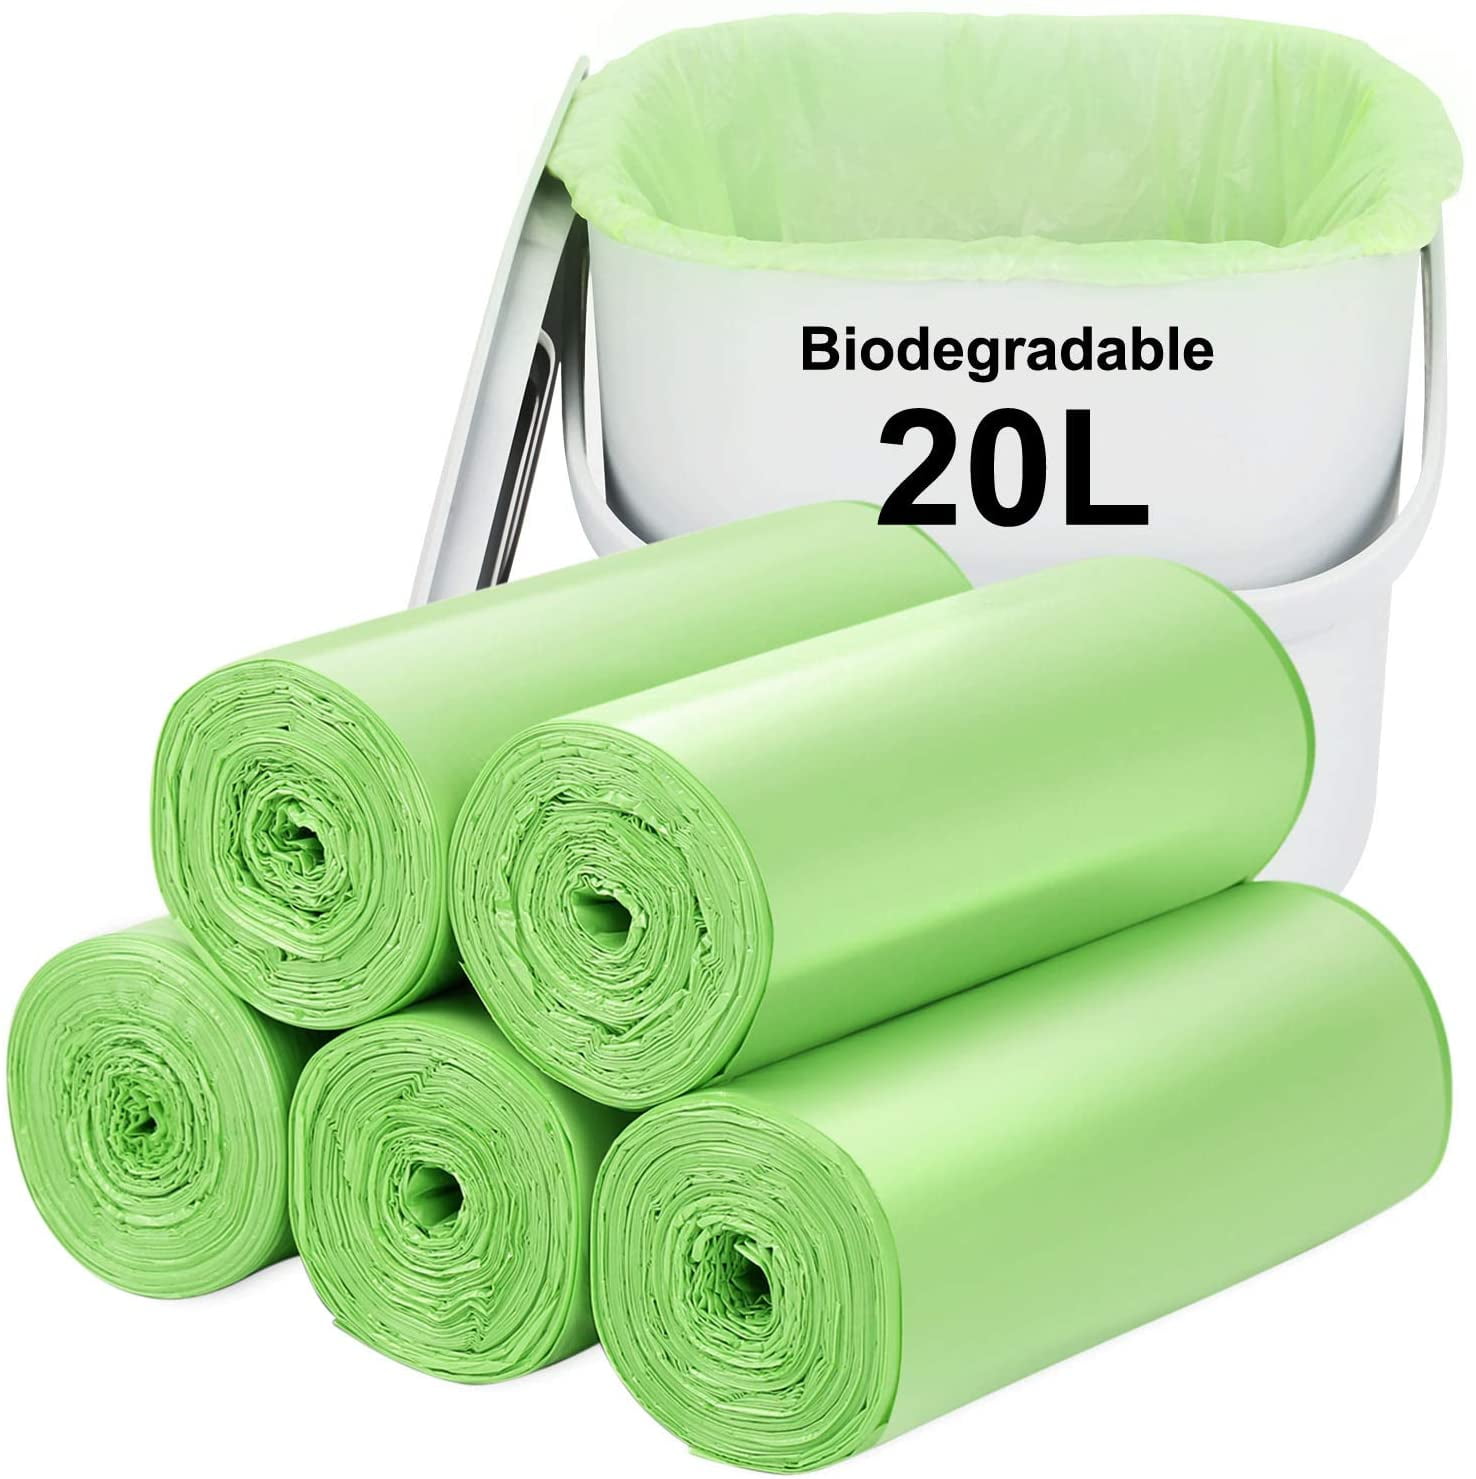 Fit 8L,120 Counts Recycling Rubbish Bags Wastebasket Liners for Kitchen Bathroom Office Car 2.6 Gallon Trash Bags Biodegradable Small Compostable Strong Garbage bags 